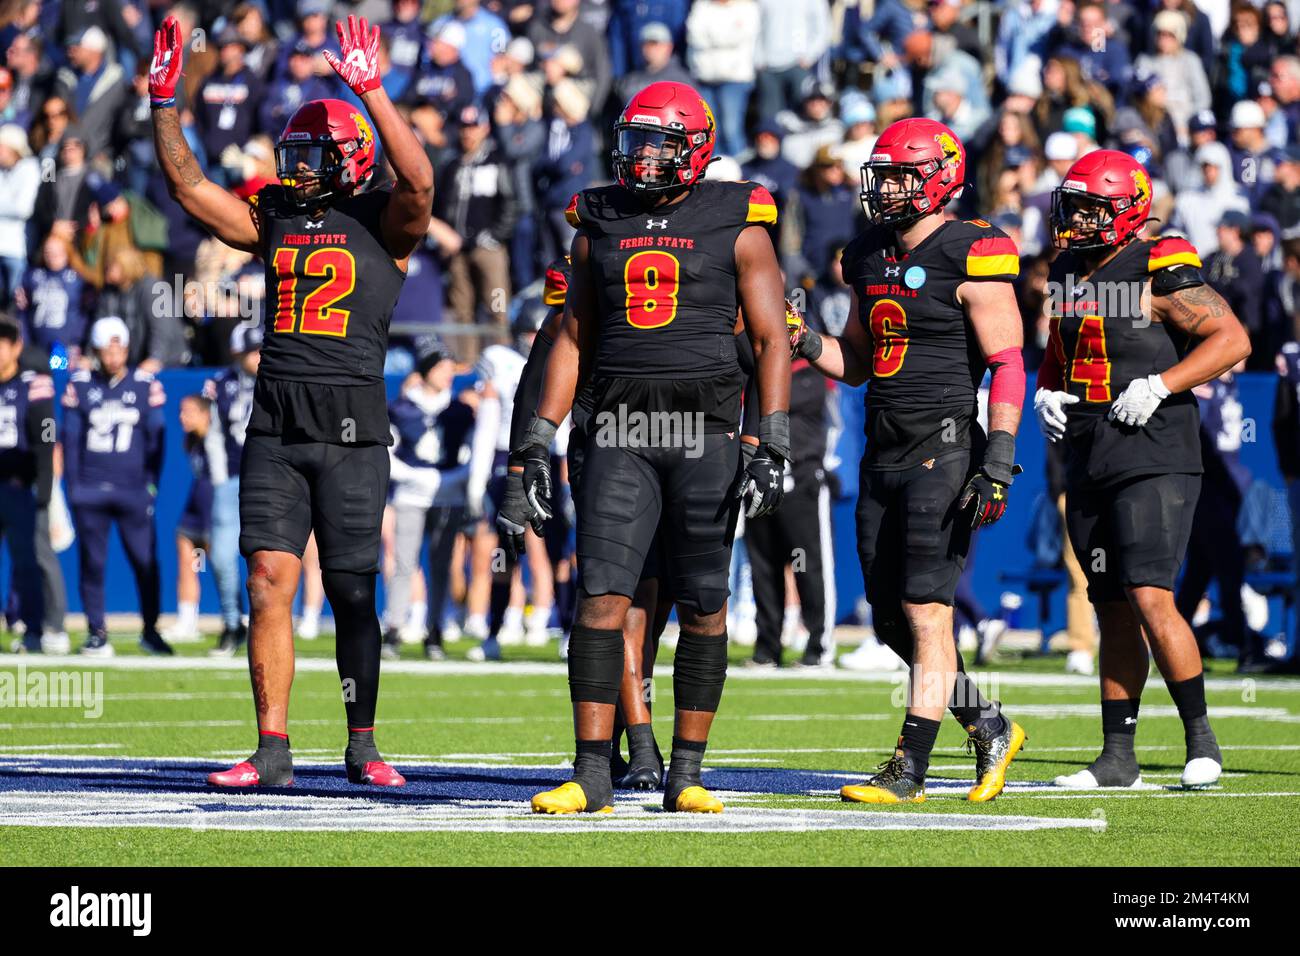 Ferris State Bulldogs defense Olalere Oladipo (8) and Caleb Murphy (12) during the 2nd quarter of the NCAA Division II national championship college f Stock Photo